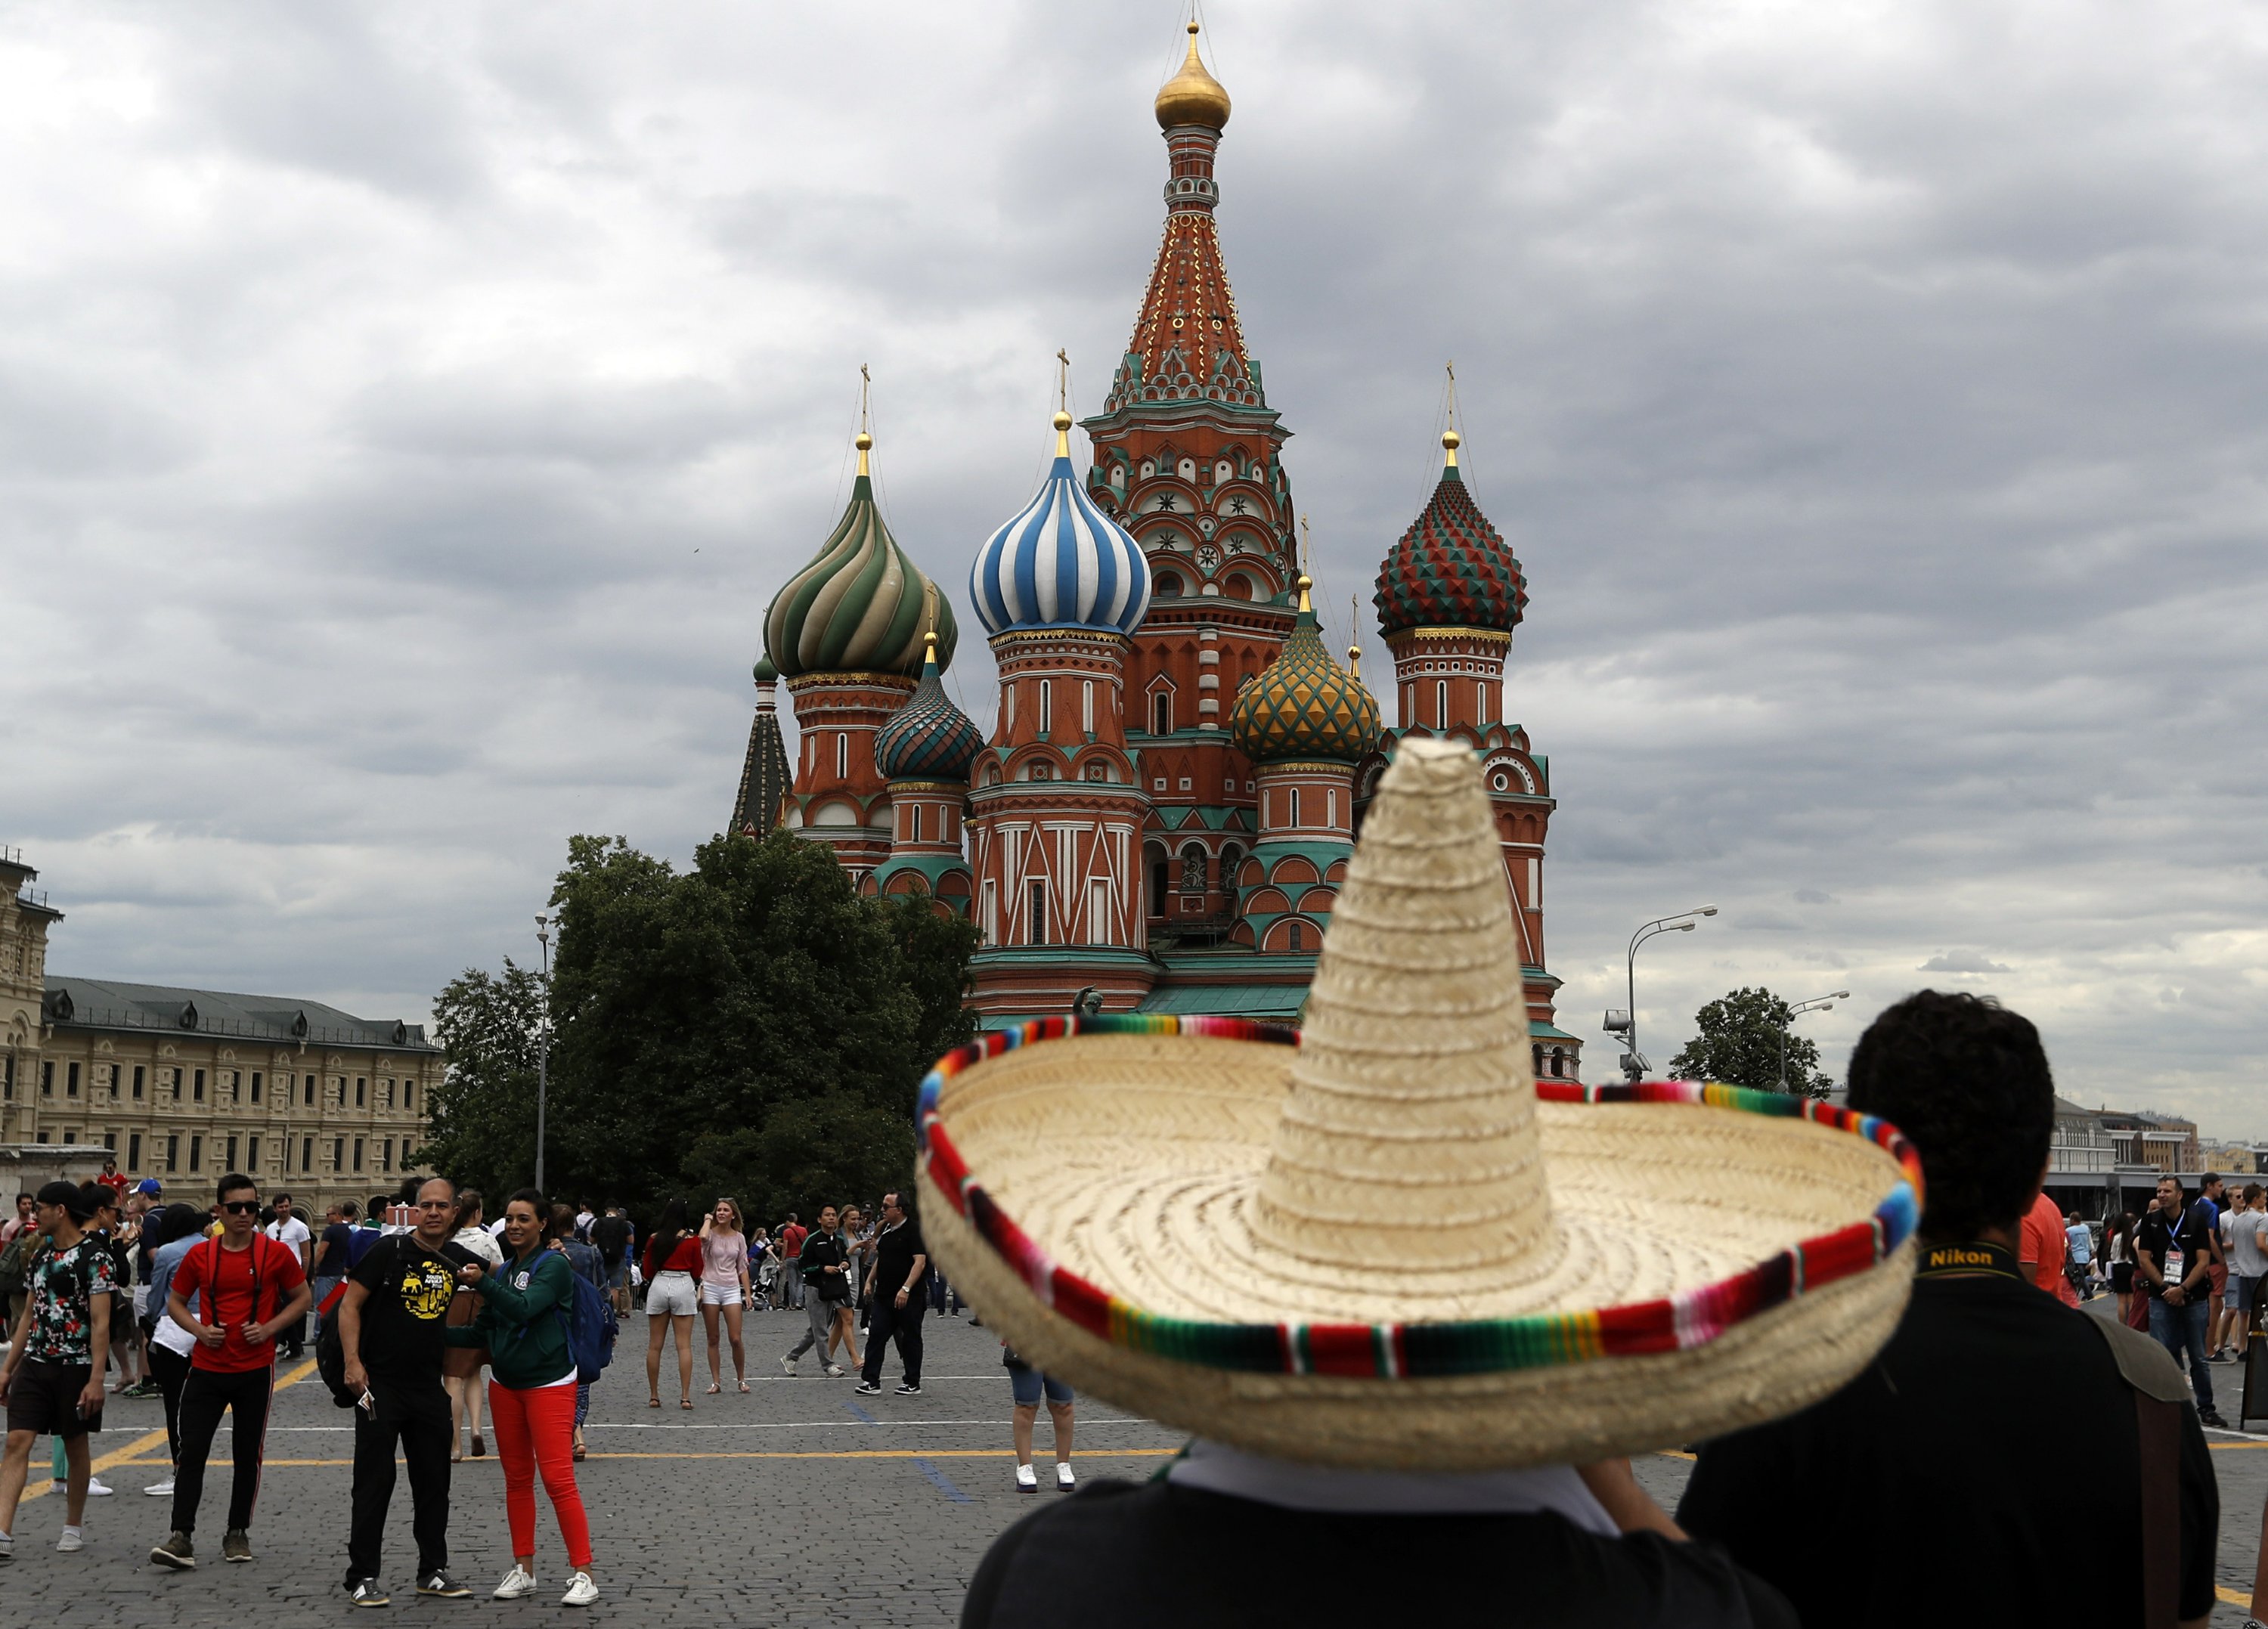 On a roll in Russia, Mexico begs World Cup fans to behave AP News